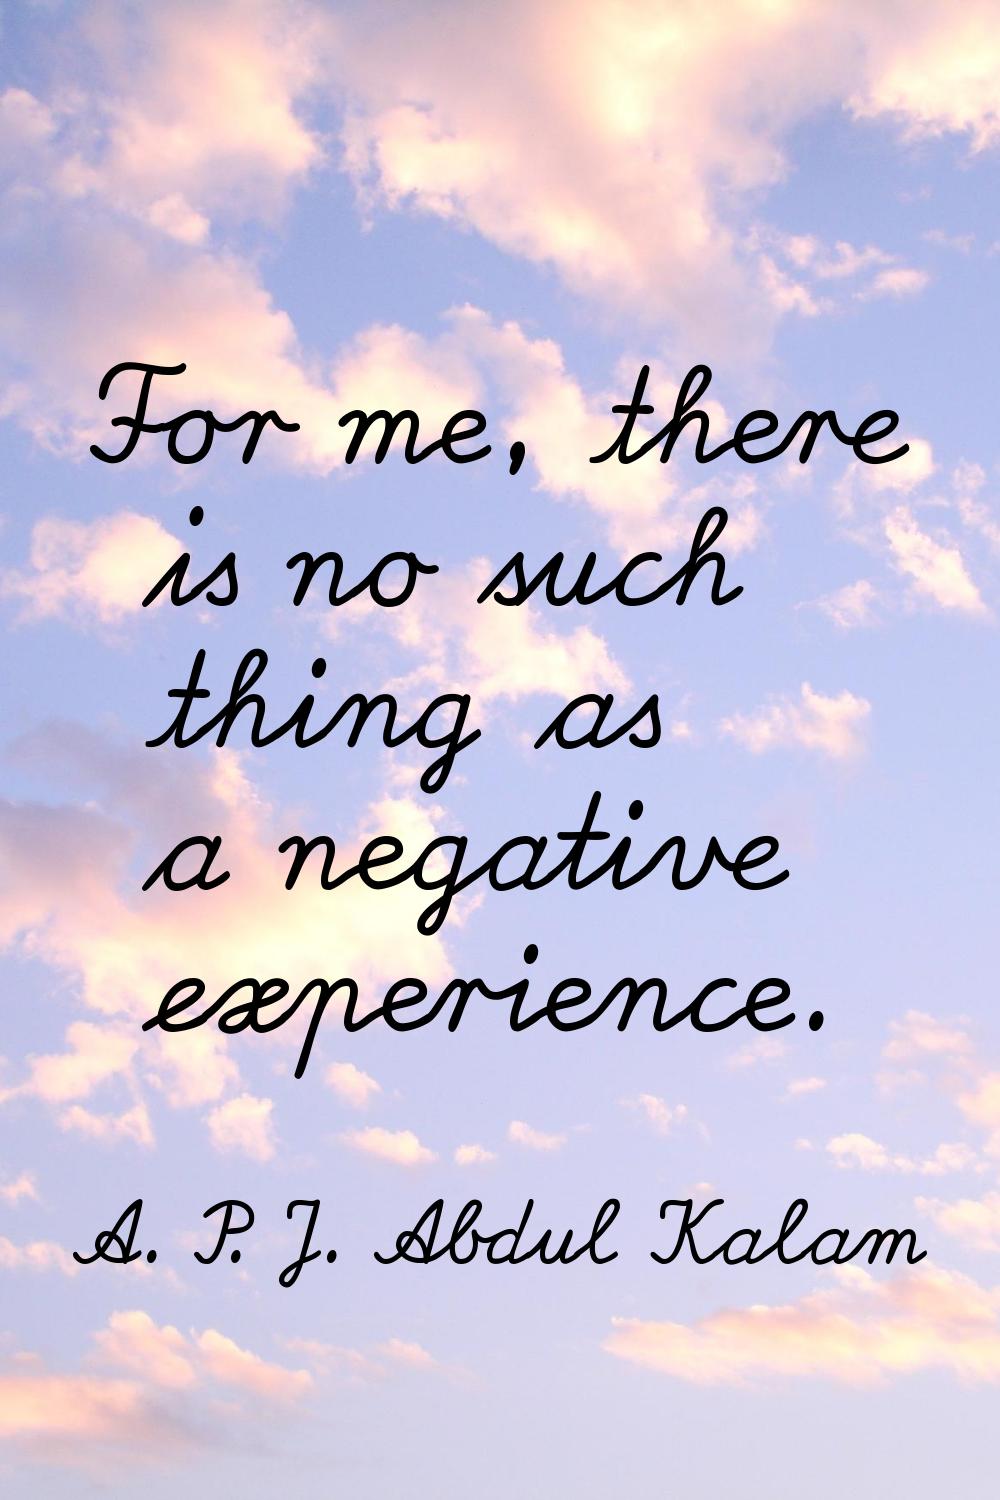 For me, there is no such thing as a negative experience.